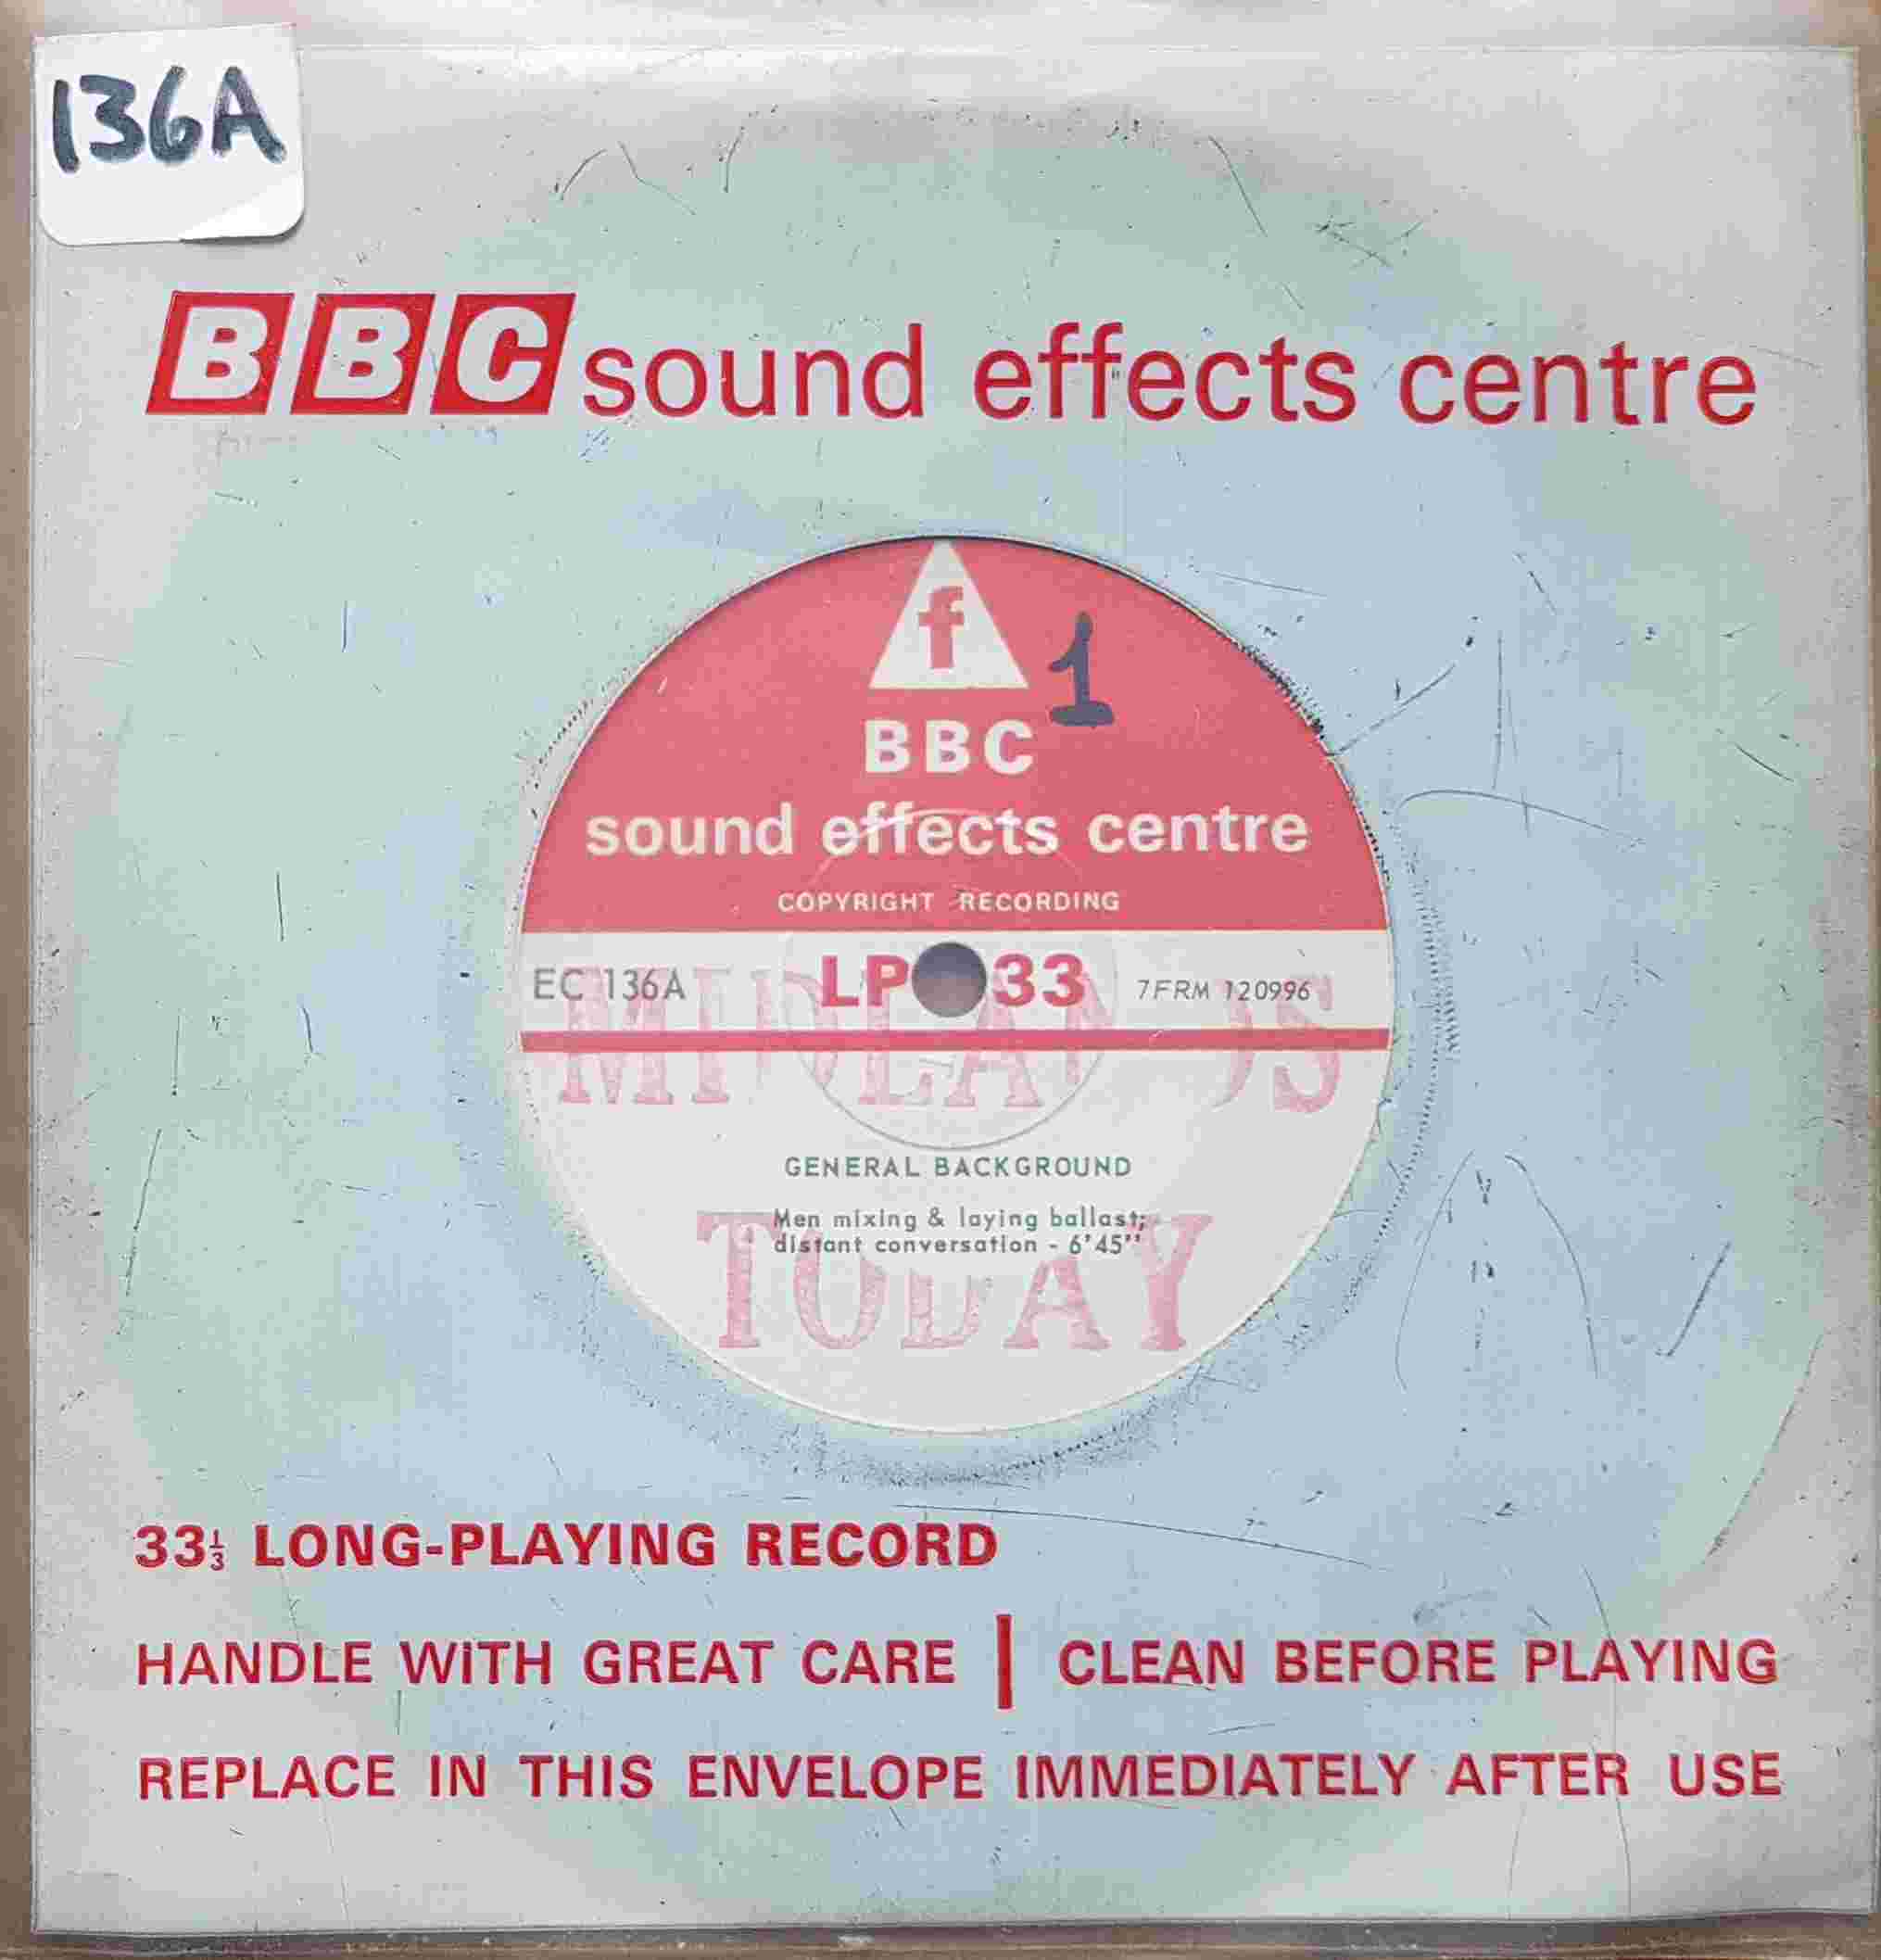 Picture of EC 136A General background by artist Not registered from the BBC records and Tapes library